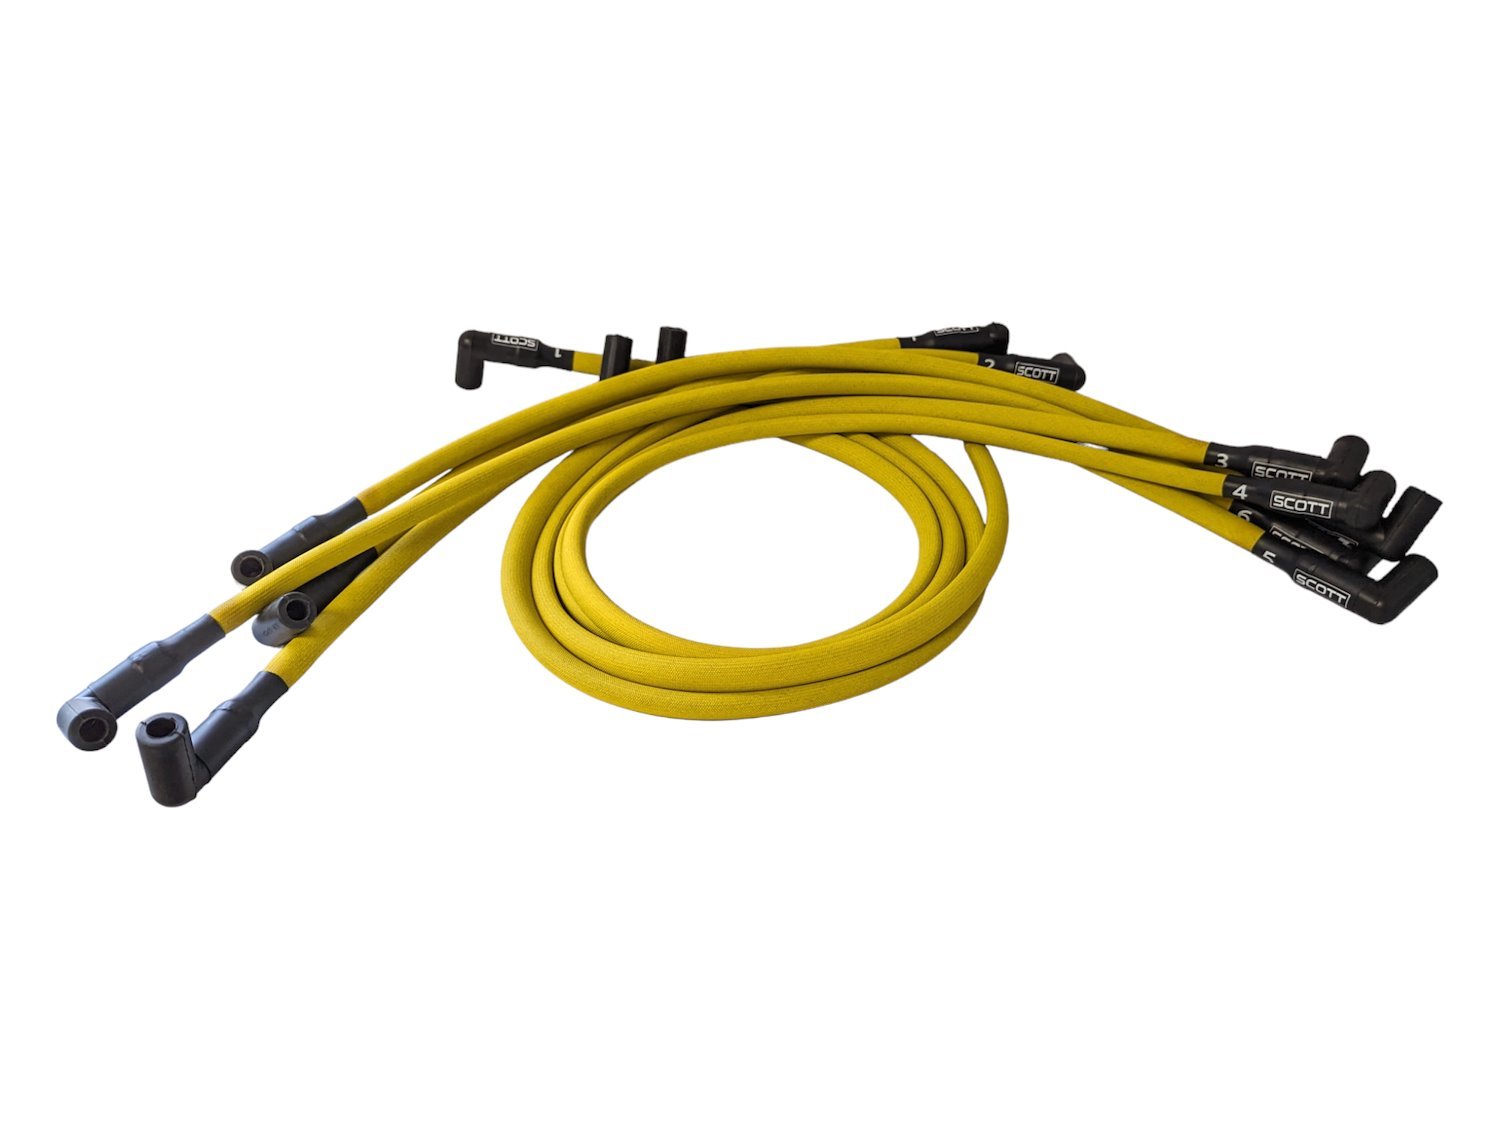 SPW-PS-437-5 High-Performance Fiberglass-Oversleeved Spark Plug Wire Set for Small Block Chevy, Over & Under [Yellow]